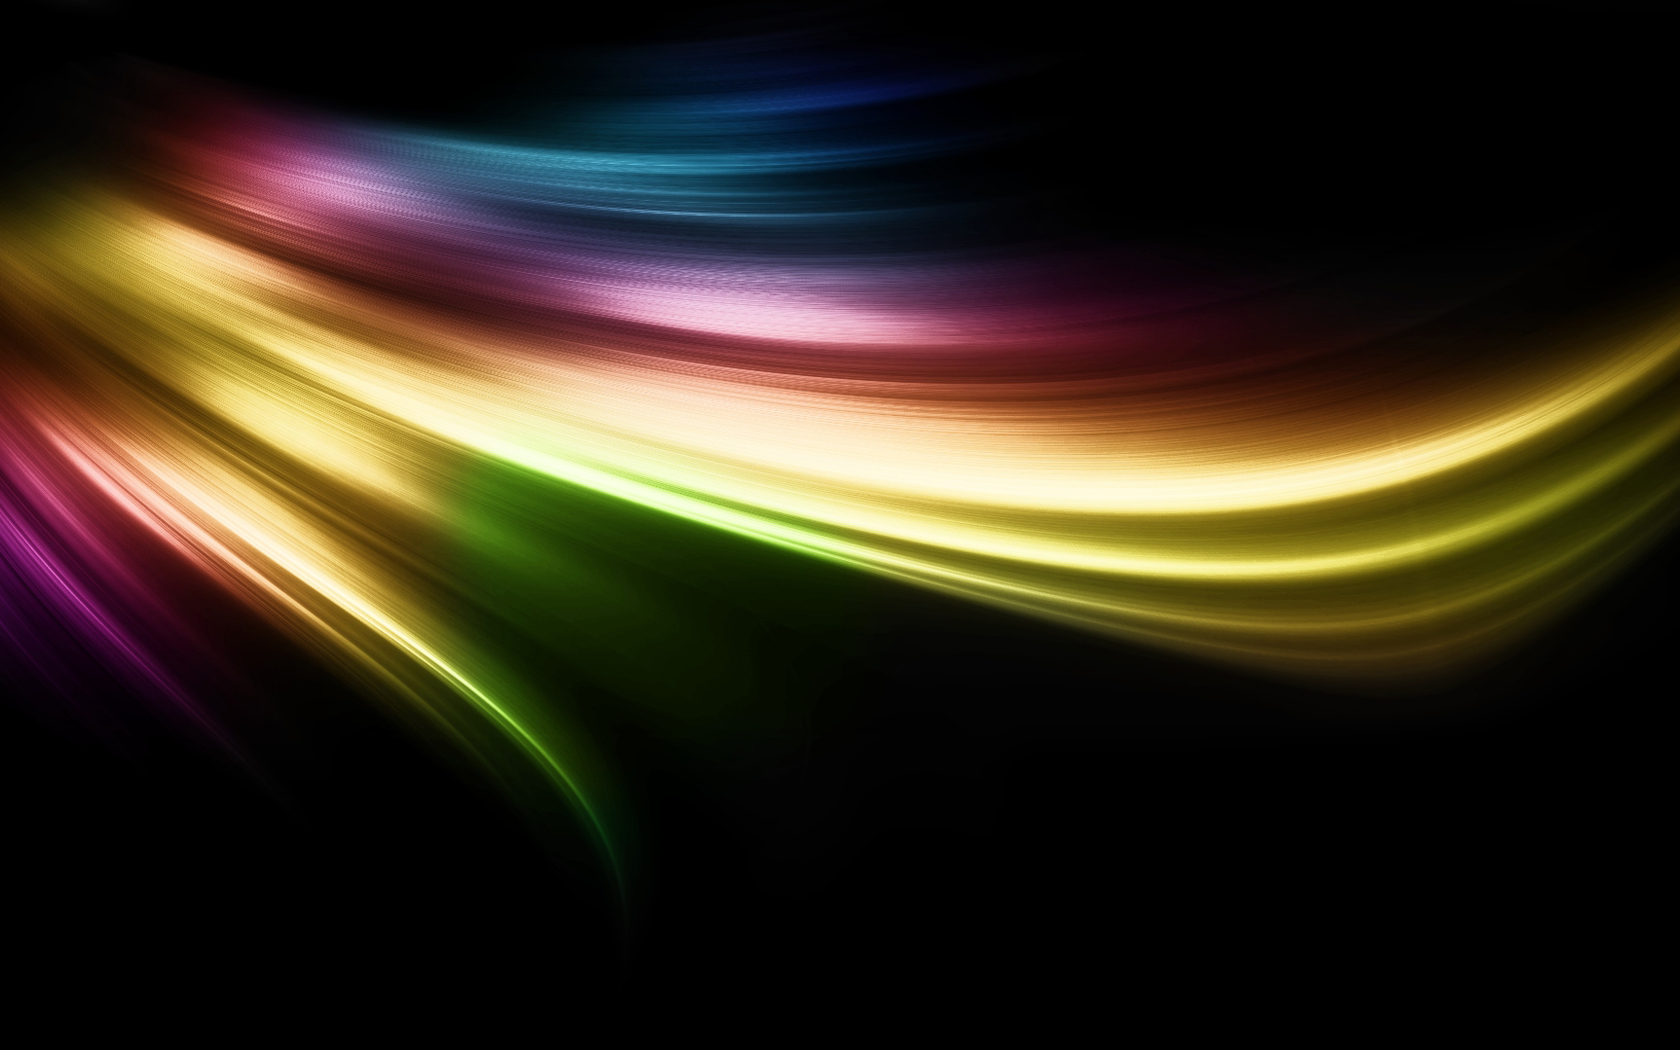 The Dynamic Glare Wallpaper Colorful Desktop Background Abstract